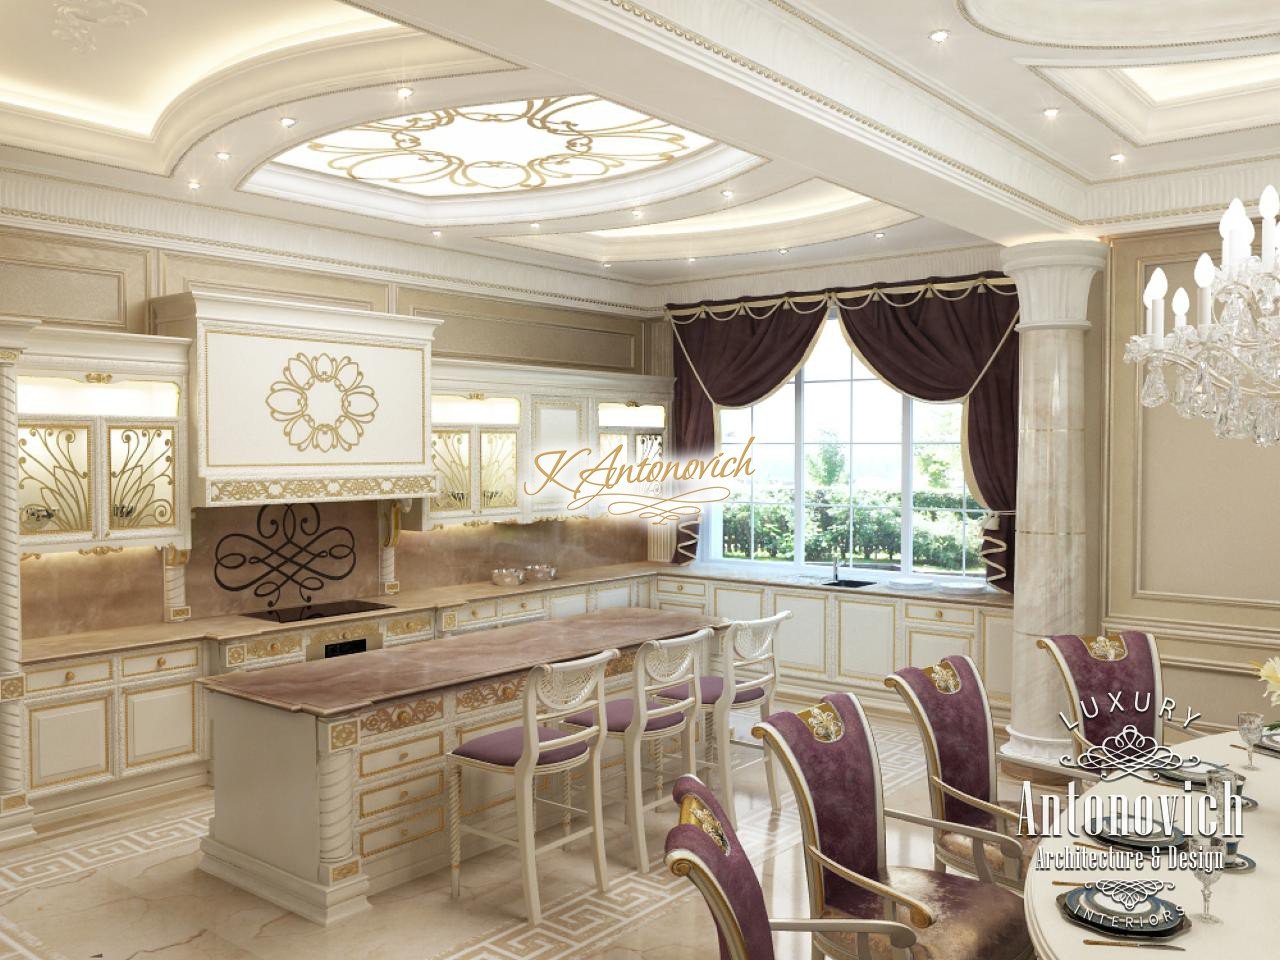 Kitchen in Classical Style UAE